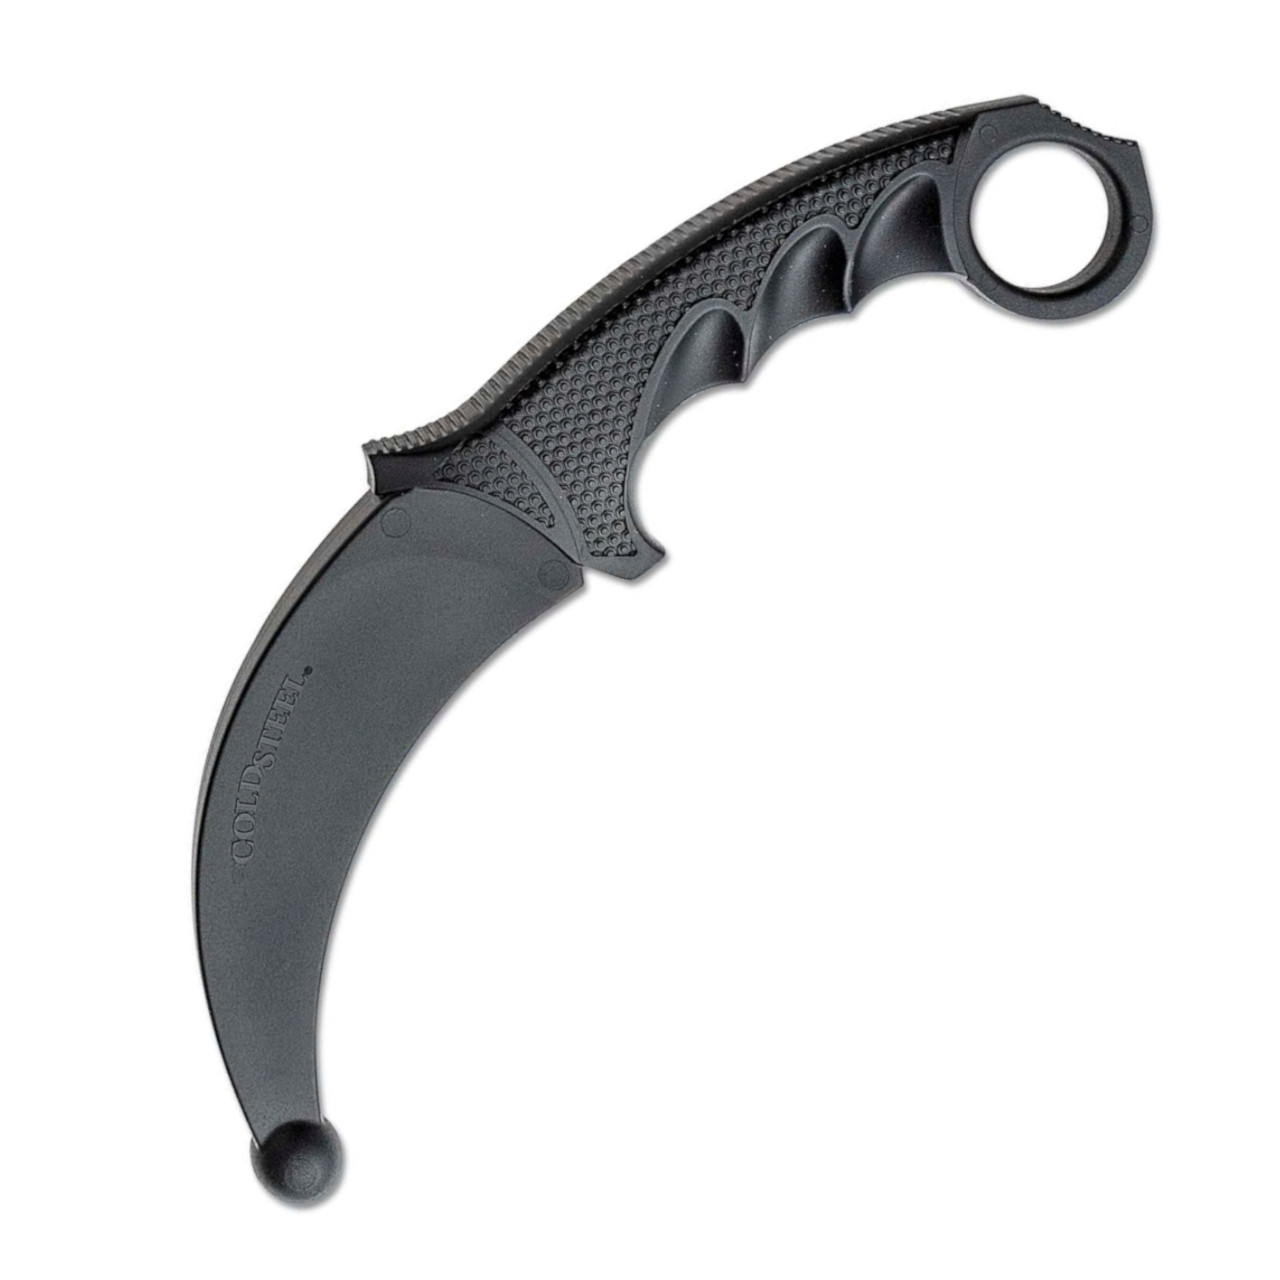 Karambit Photos, Images and Pictures